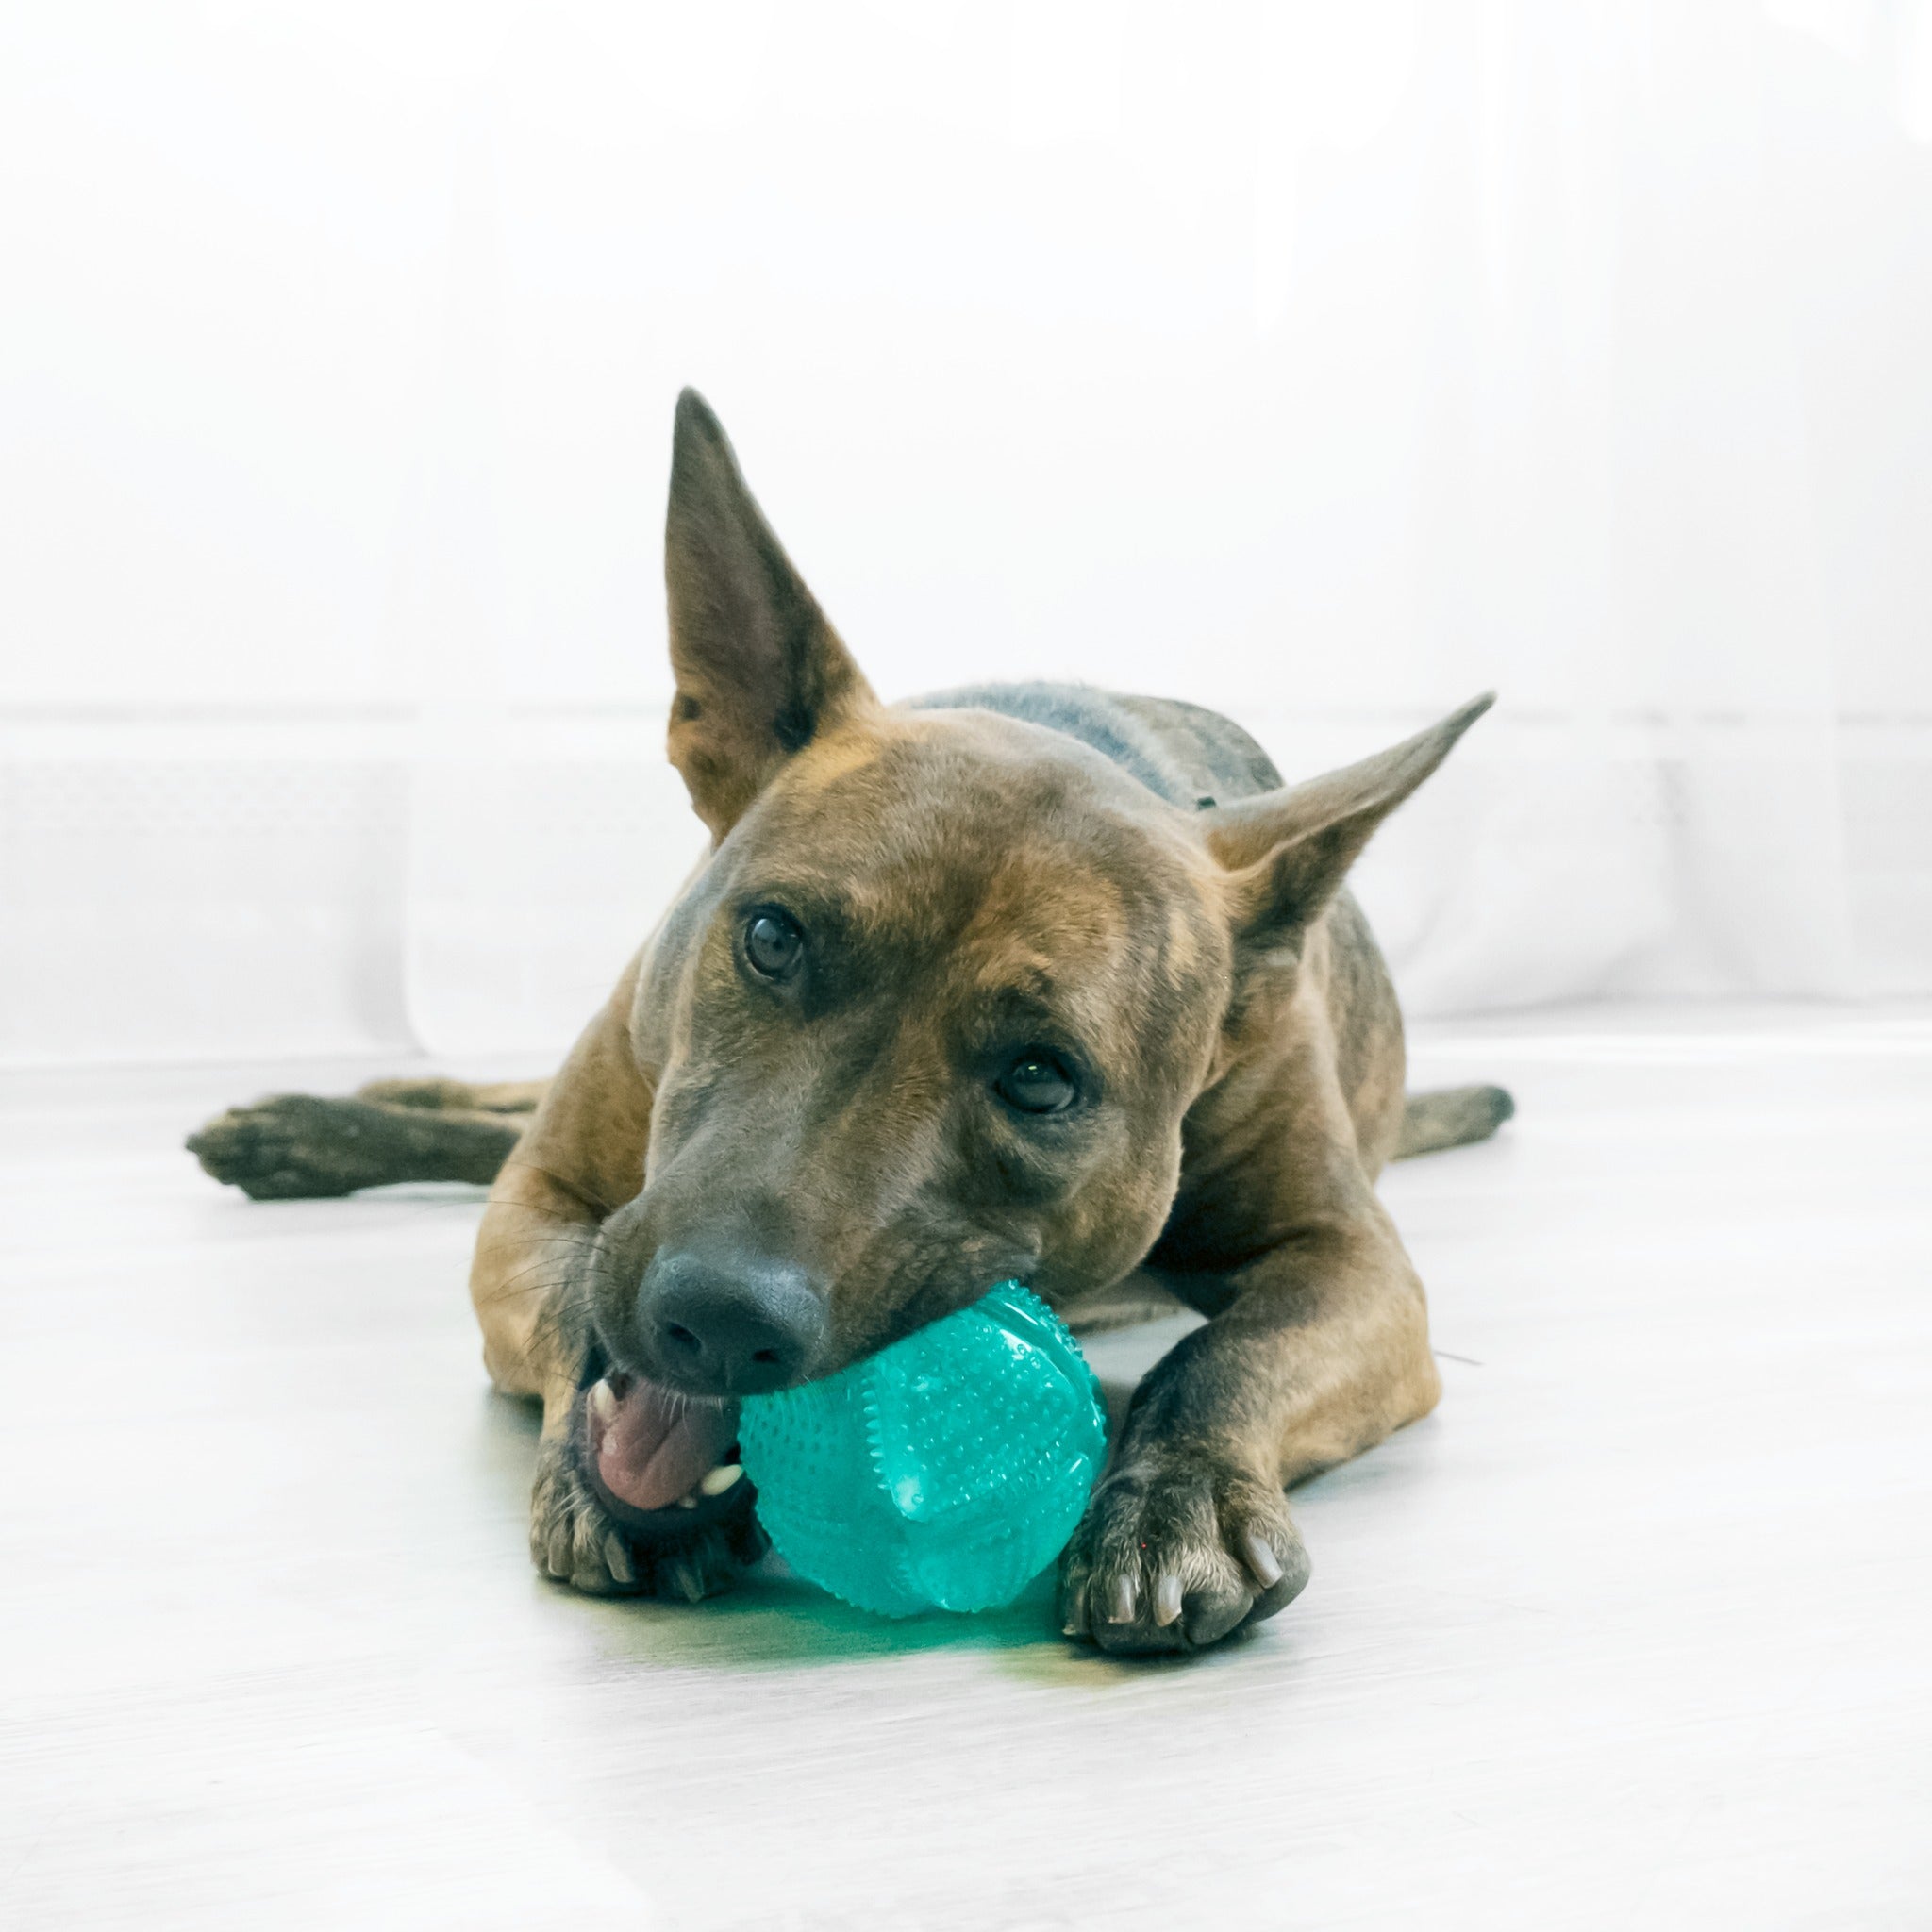 Kong Squeezz Dental Ball, Hundespielzeug - Woofshack